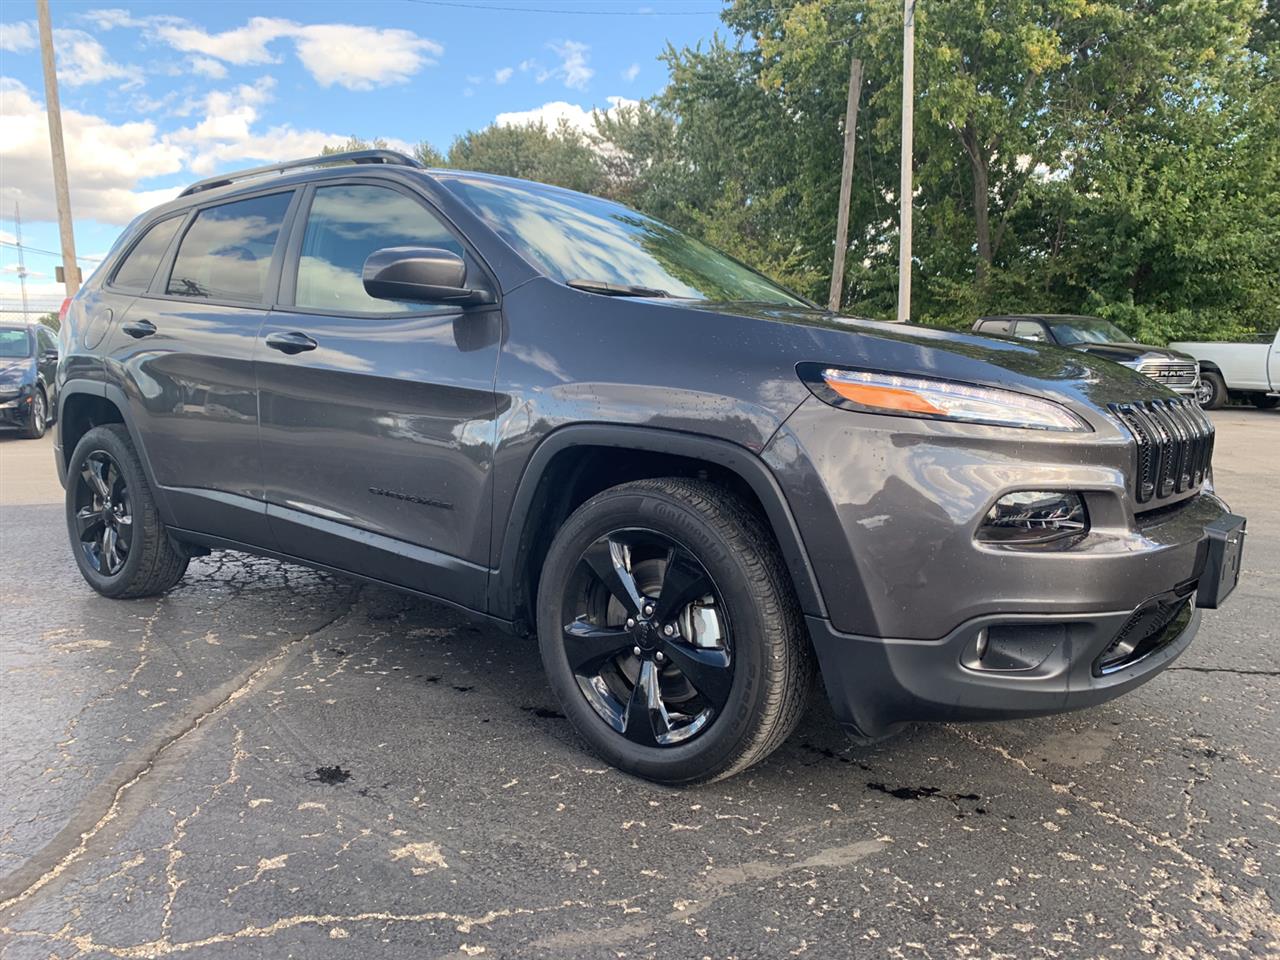 Pre-Owned 2018 Jeep Cherokee Latitude Sport Utility in Merriam #JS20151A | Reed Chrysler Dodge Tire Size For 2018 Jeep Cherokee Latitude